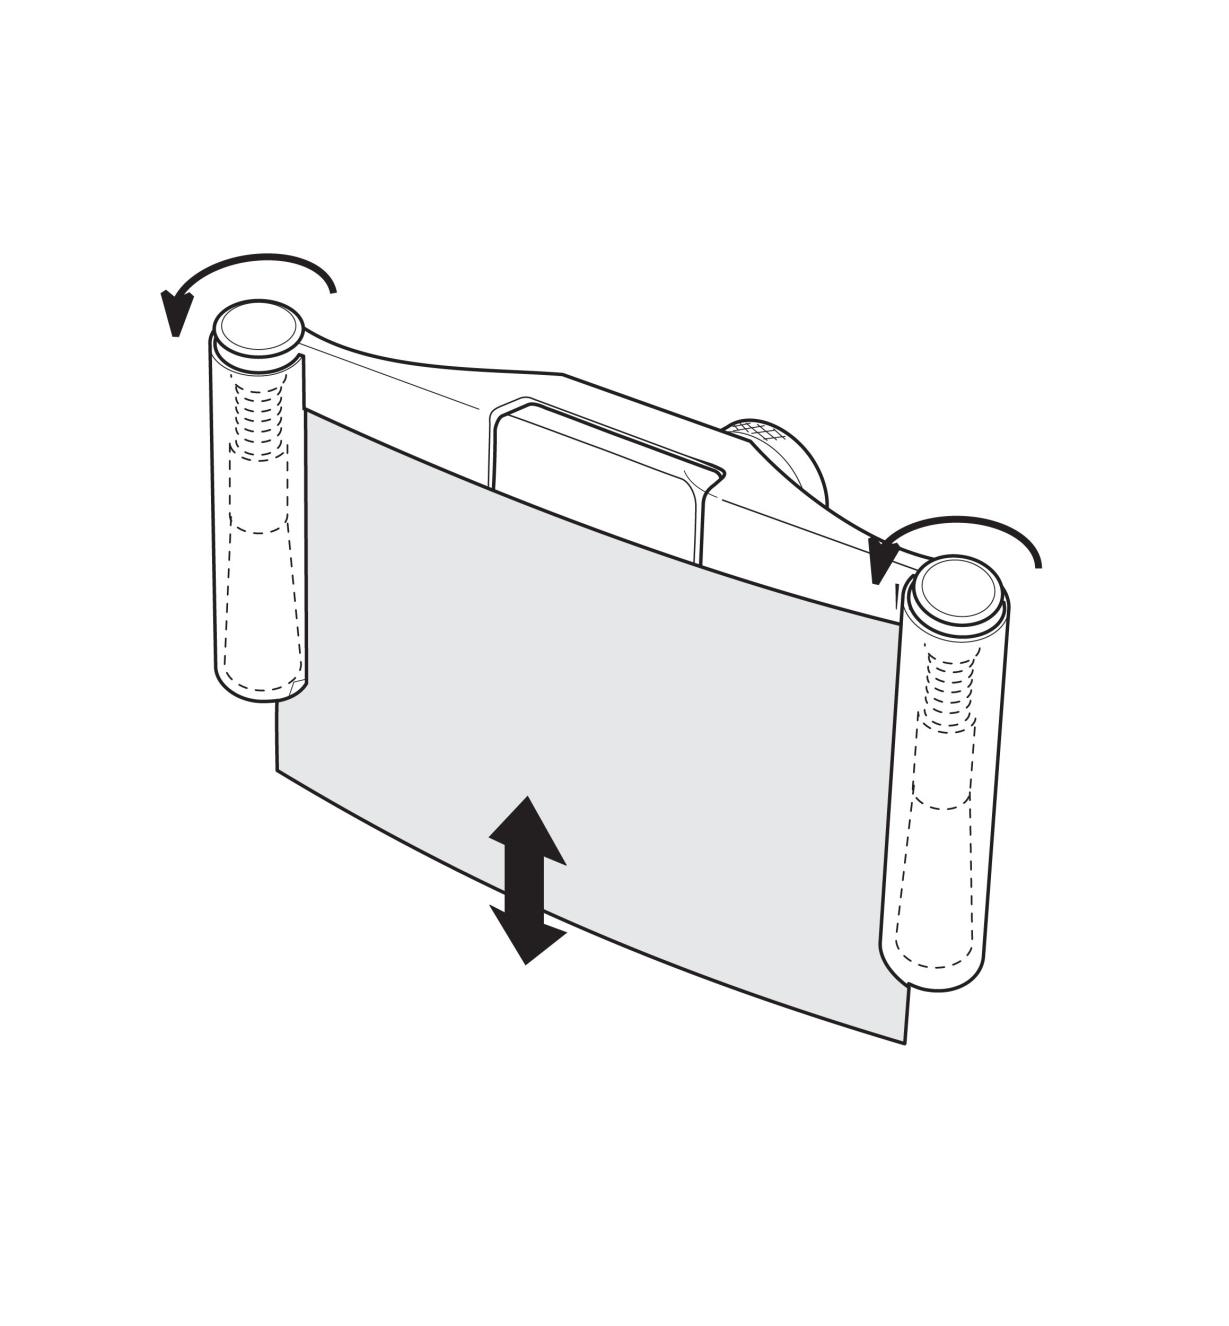 Illustration showing how to adjust the height of the blade in the holder